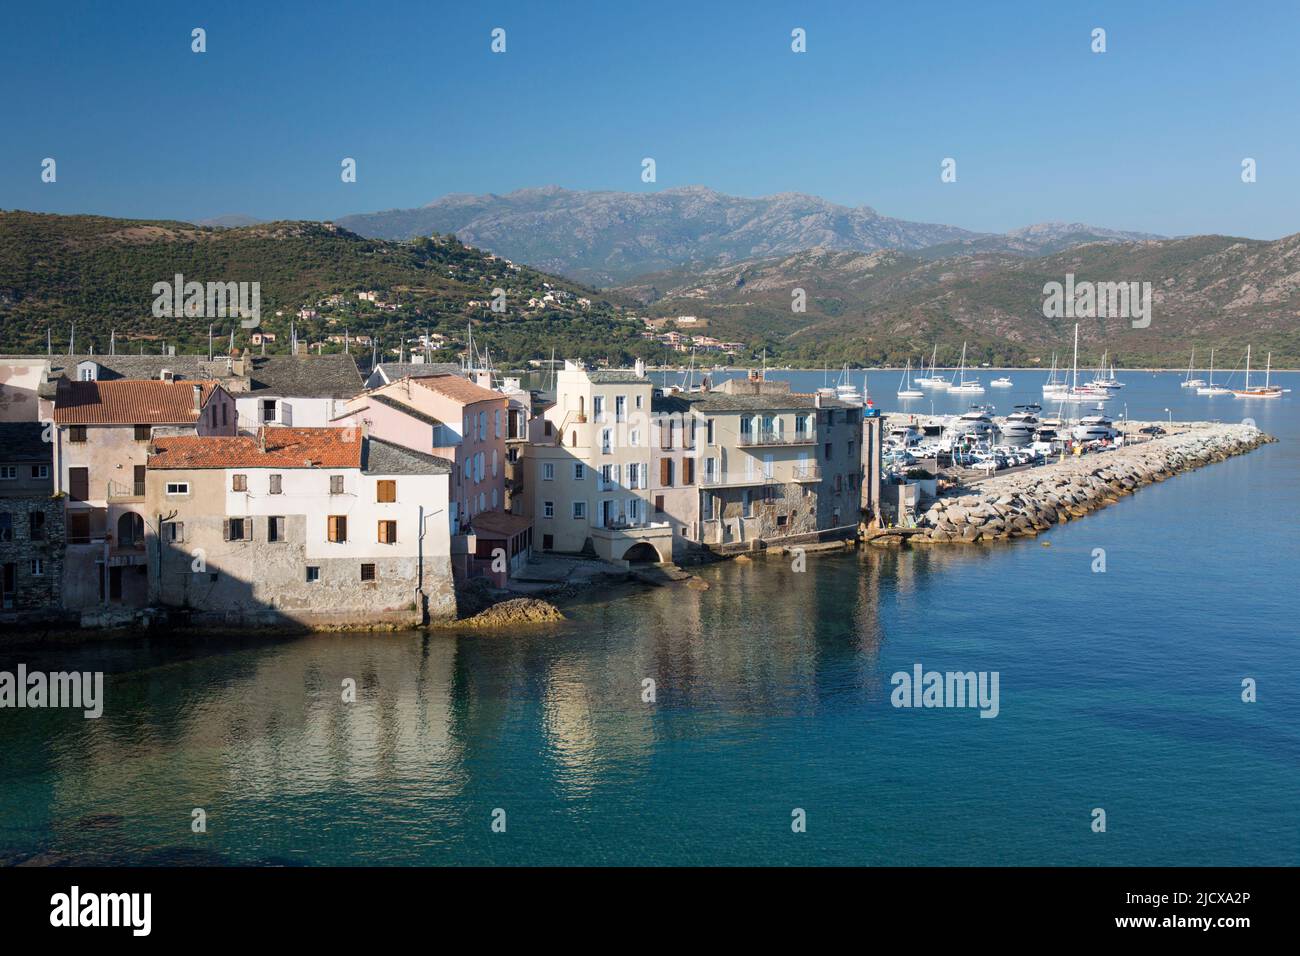 View over rooftops from the citadel ramparts, waterside houses reflected in calm sea, St-Florent, Haute-Corse, Corsica, France, Mediterranean, Europe Stock Photo